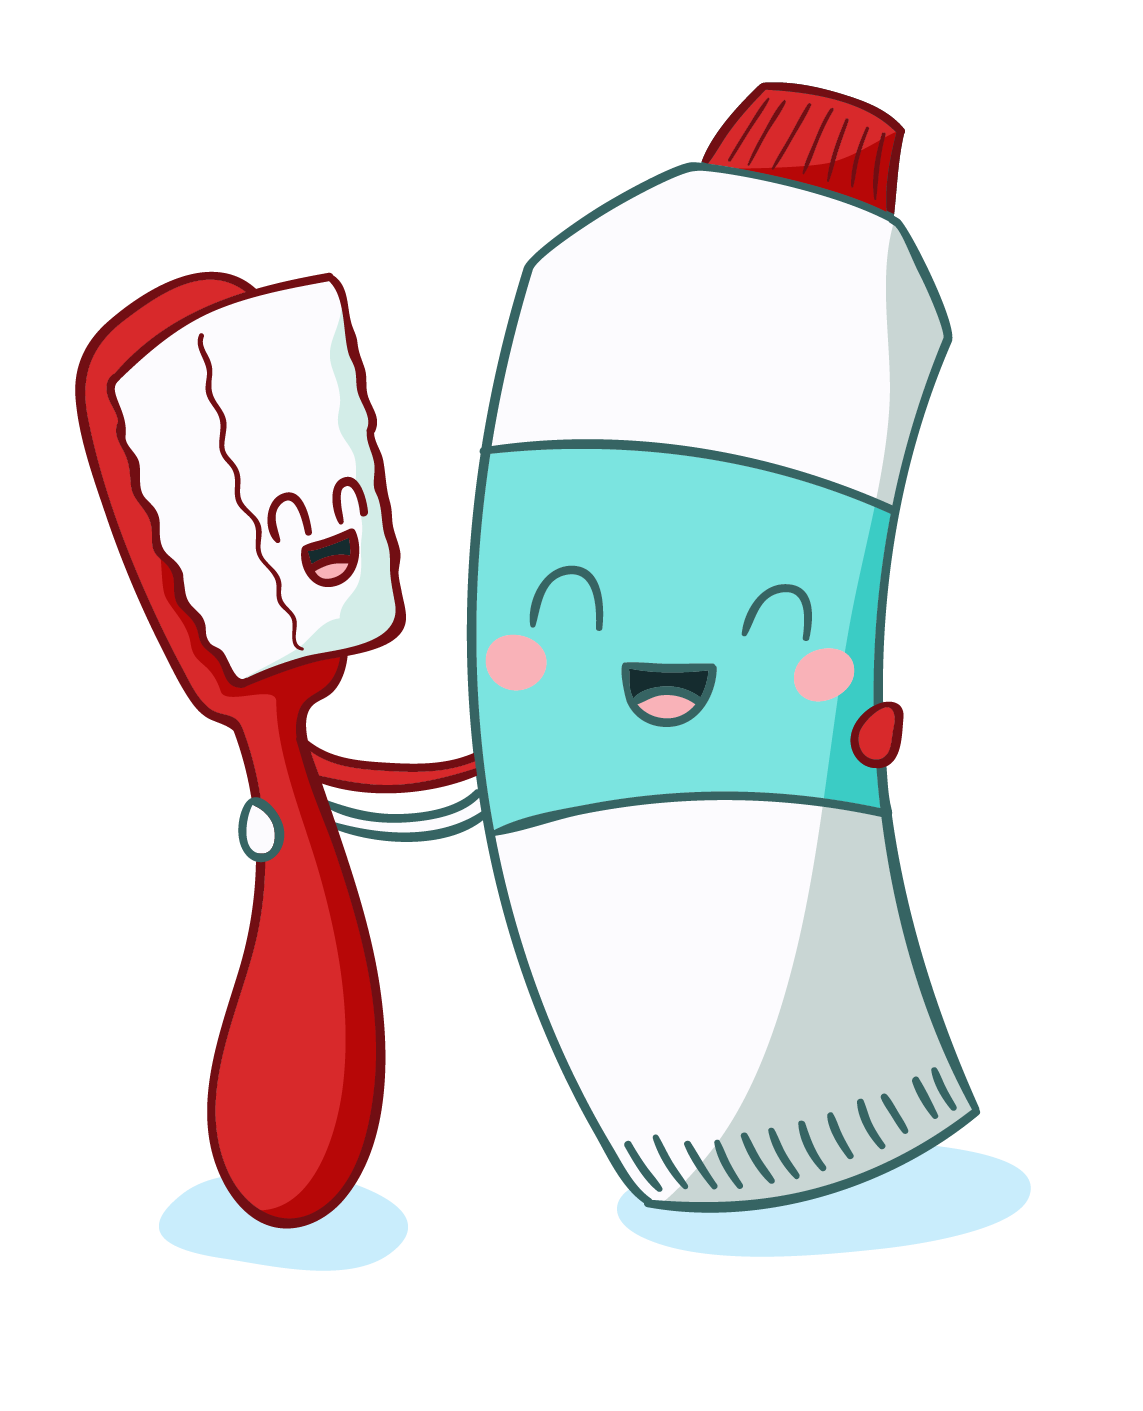 Toothbrush Brushing Tooth Electric Cartoon Free Photo PNG Clipart